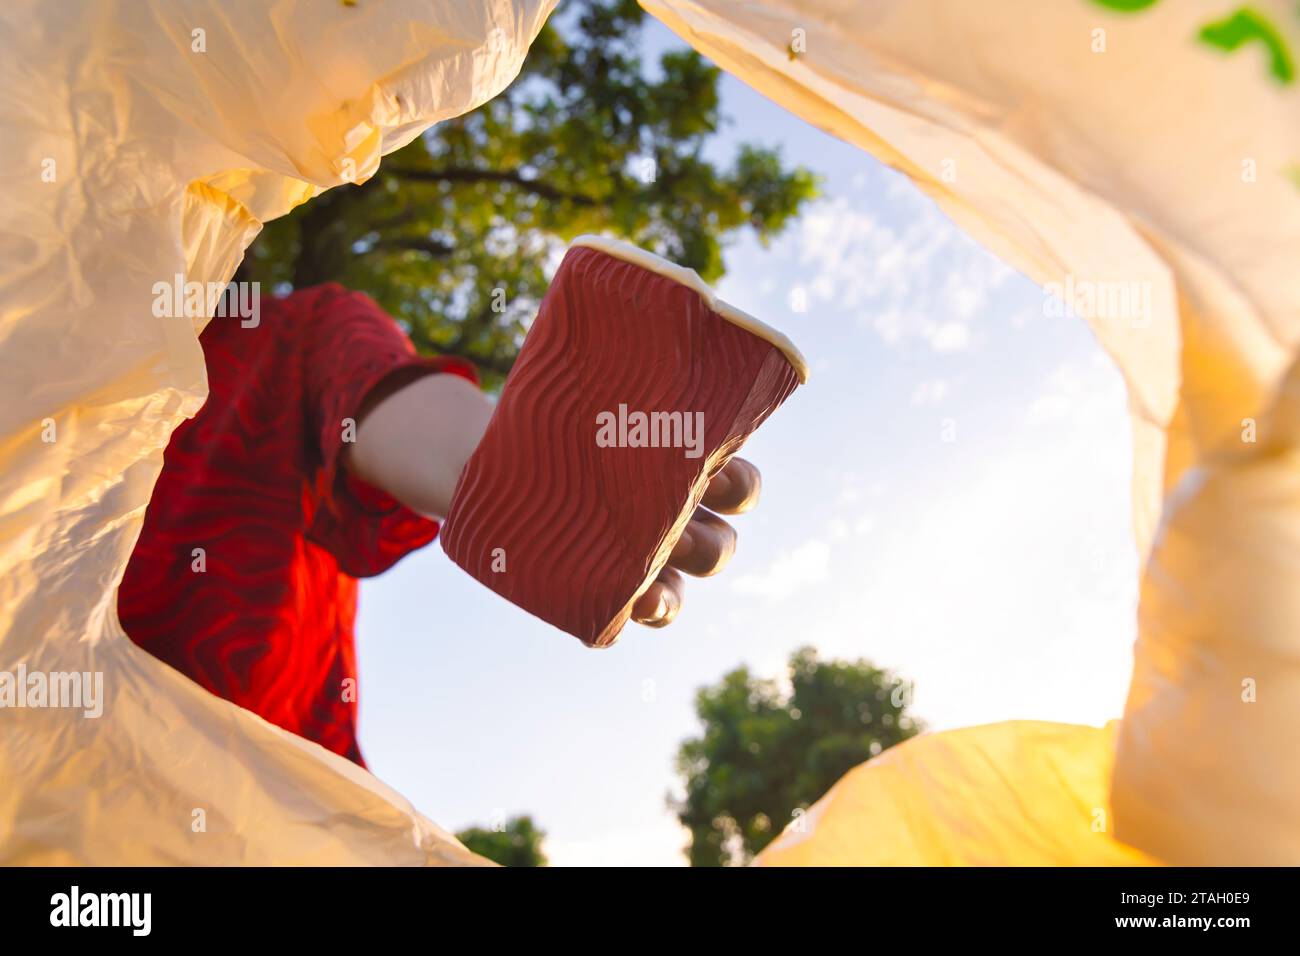 Volunteers put coffee cup waste into plastic bags for recycling, Reuse, and waste management concepts. Stock Photo